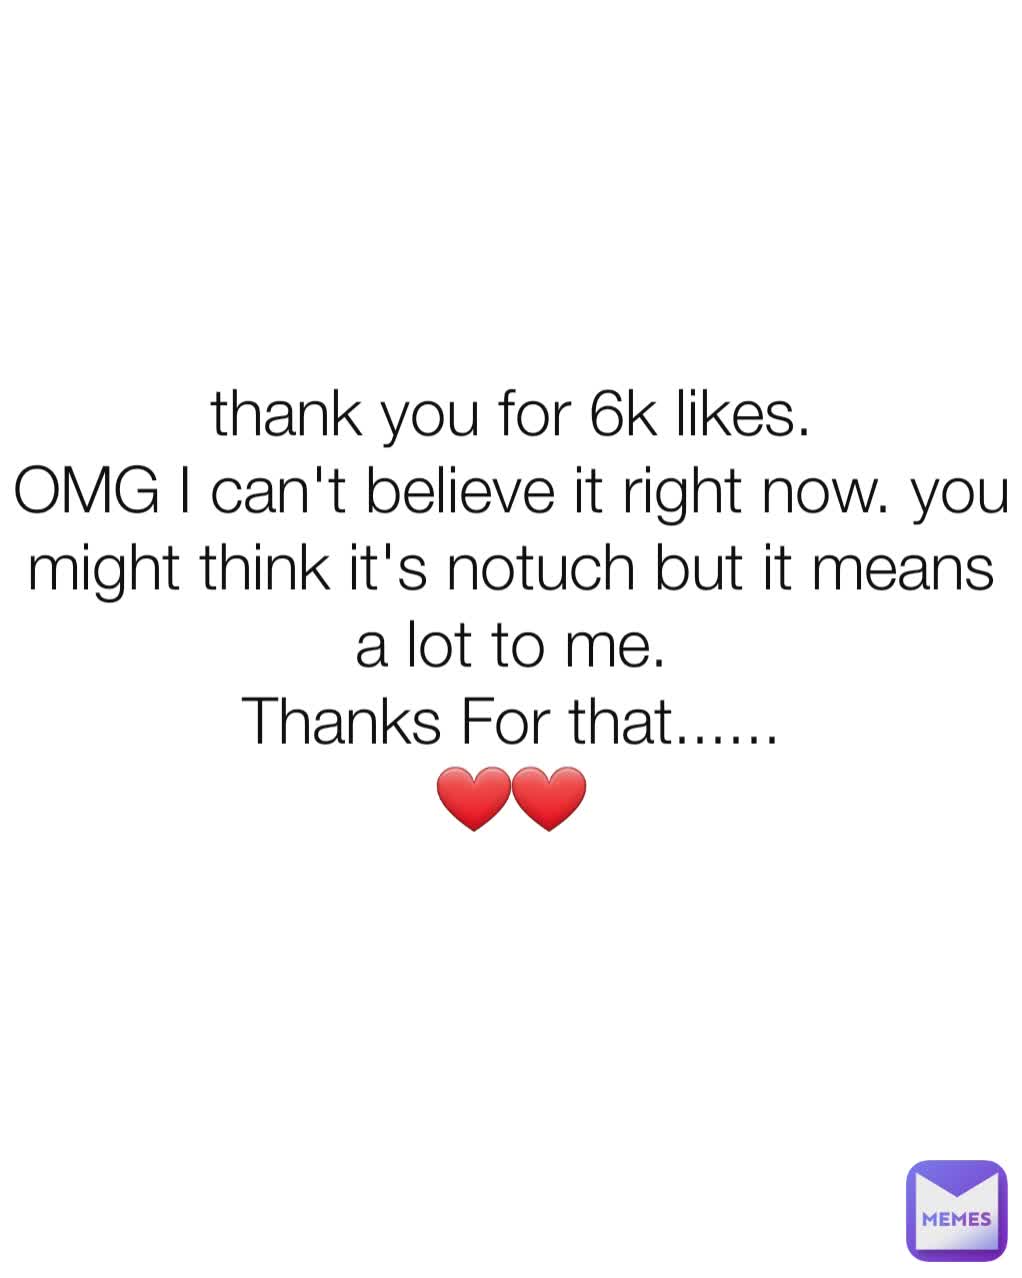 thank you for 6k likes.
OMG I can't believe it right now. you might think it's notuch but it means a lot to me.
Thanks For that......
❤️❤️
